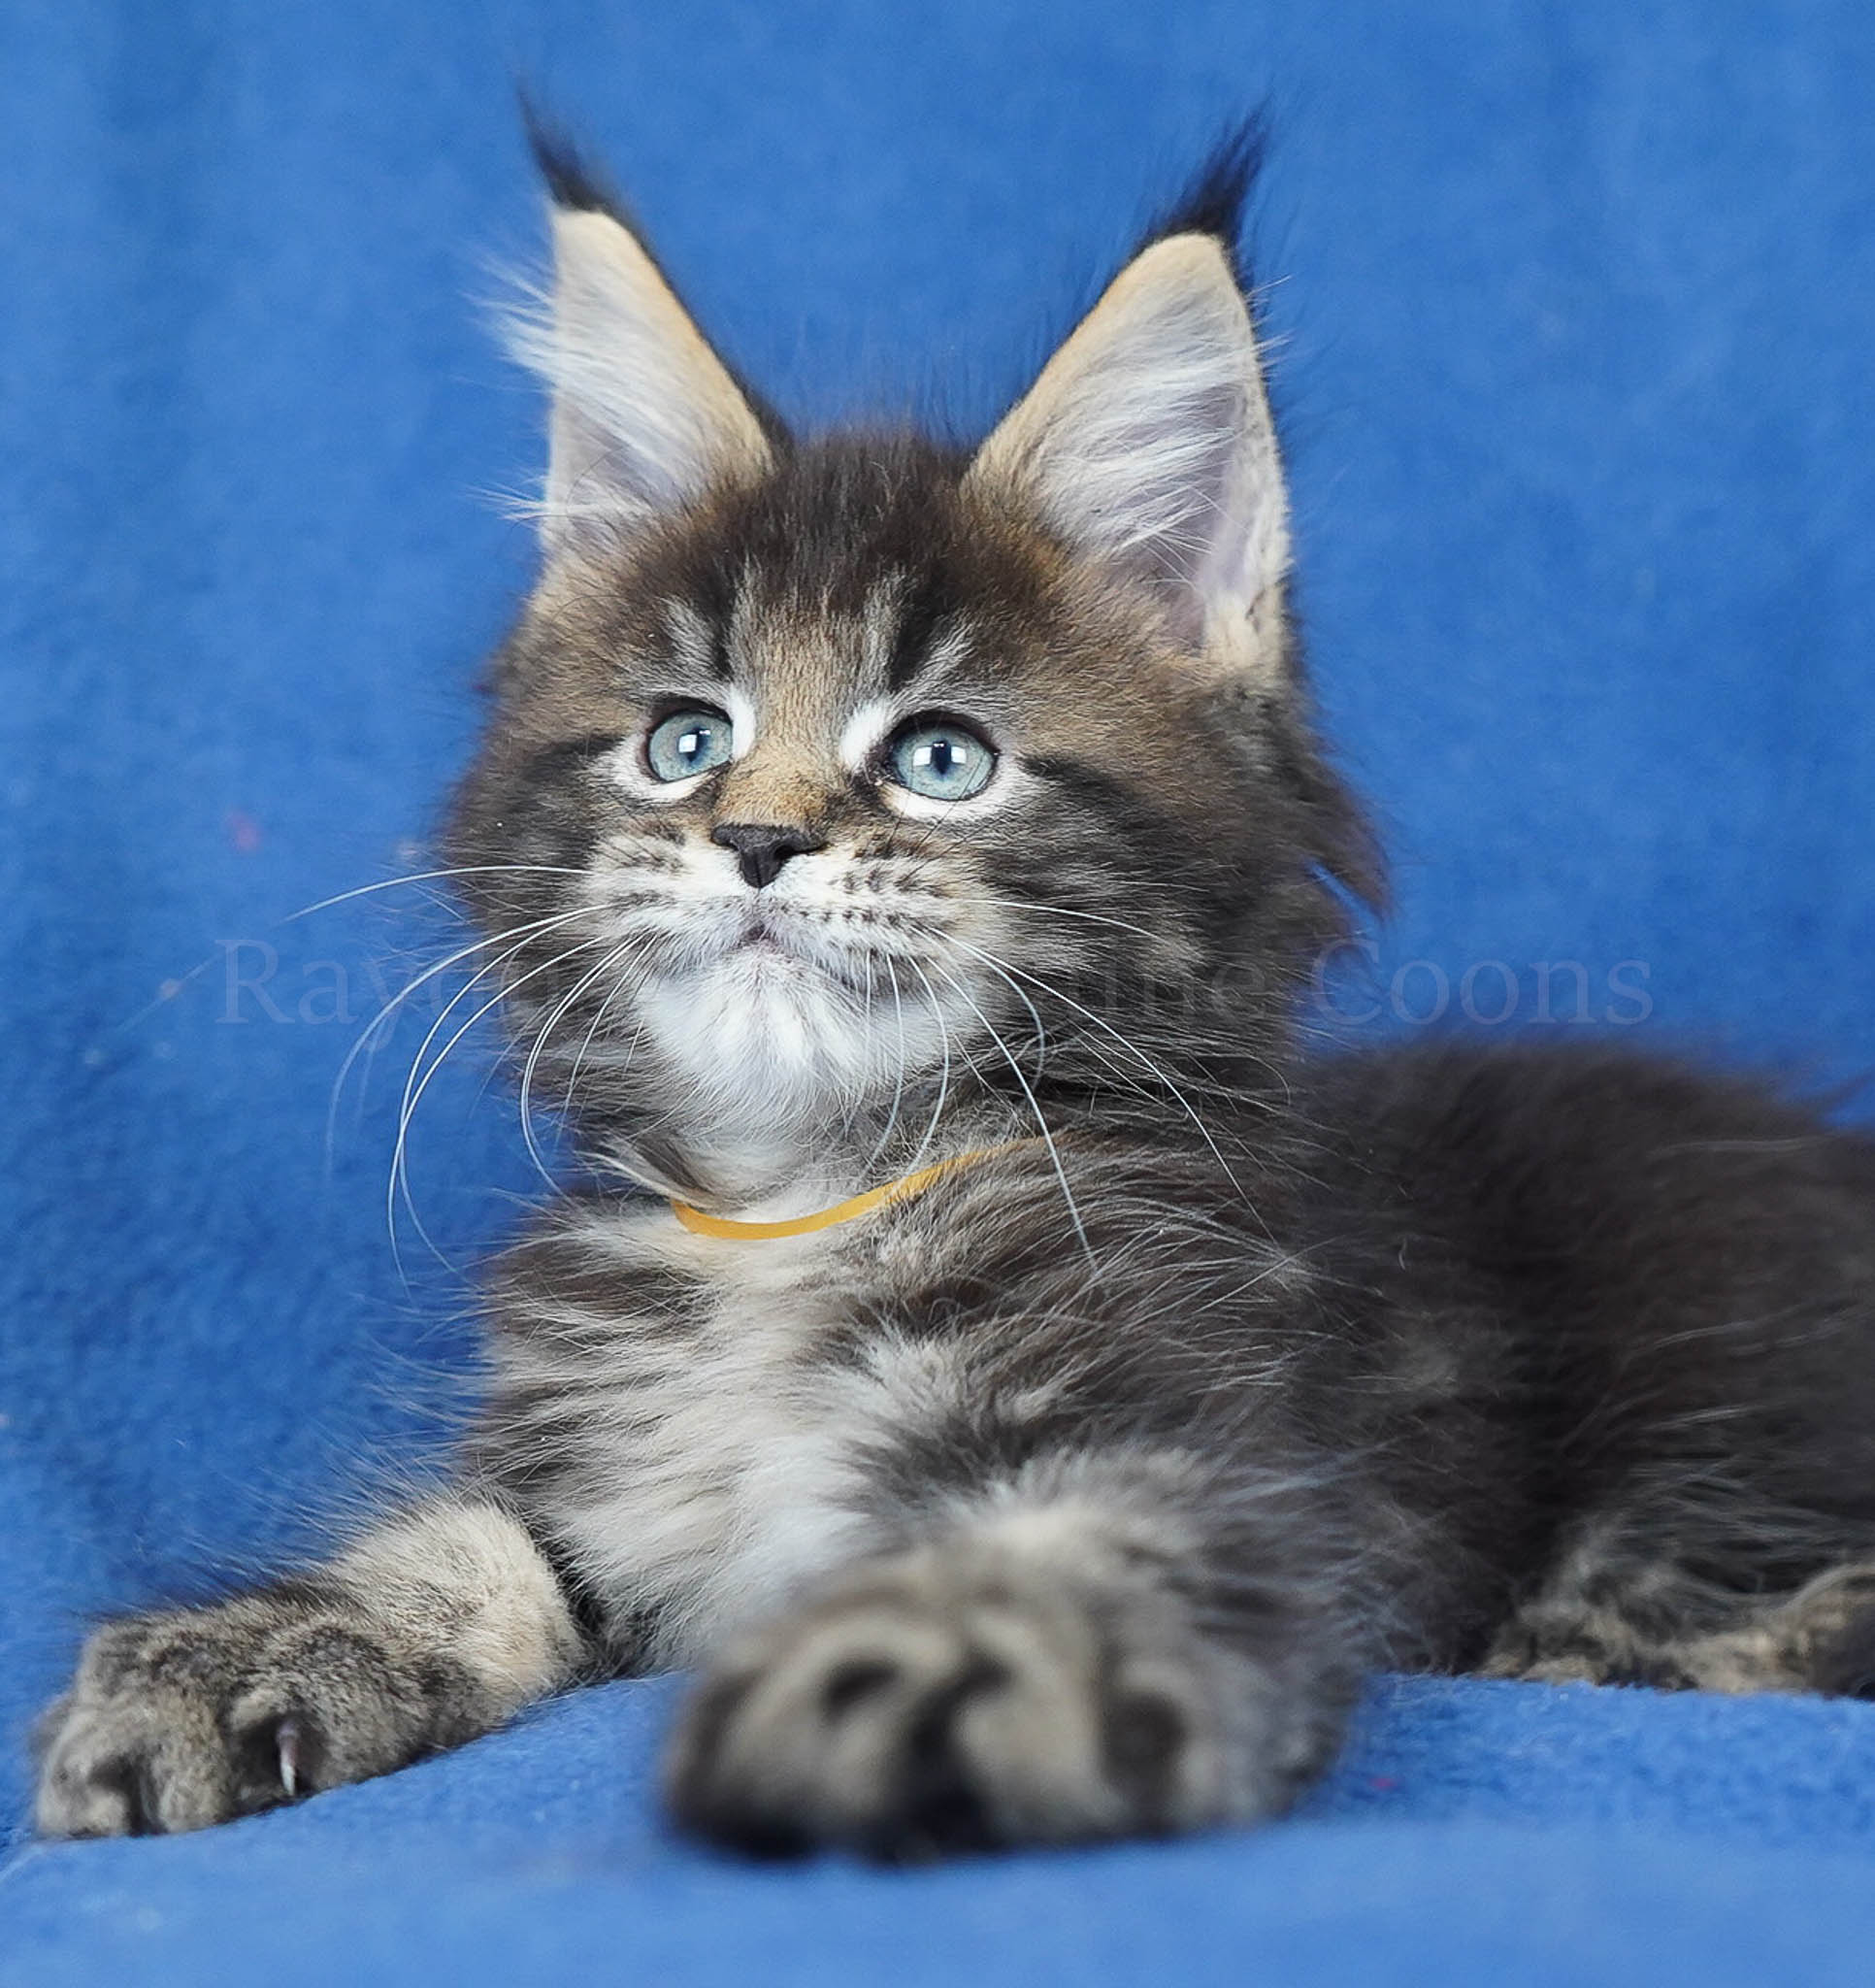 Ivan 8 weeks old-RESERVED for Corvin from Mahomet, IL